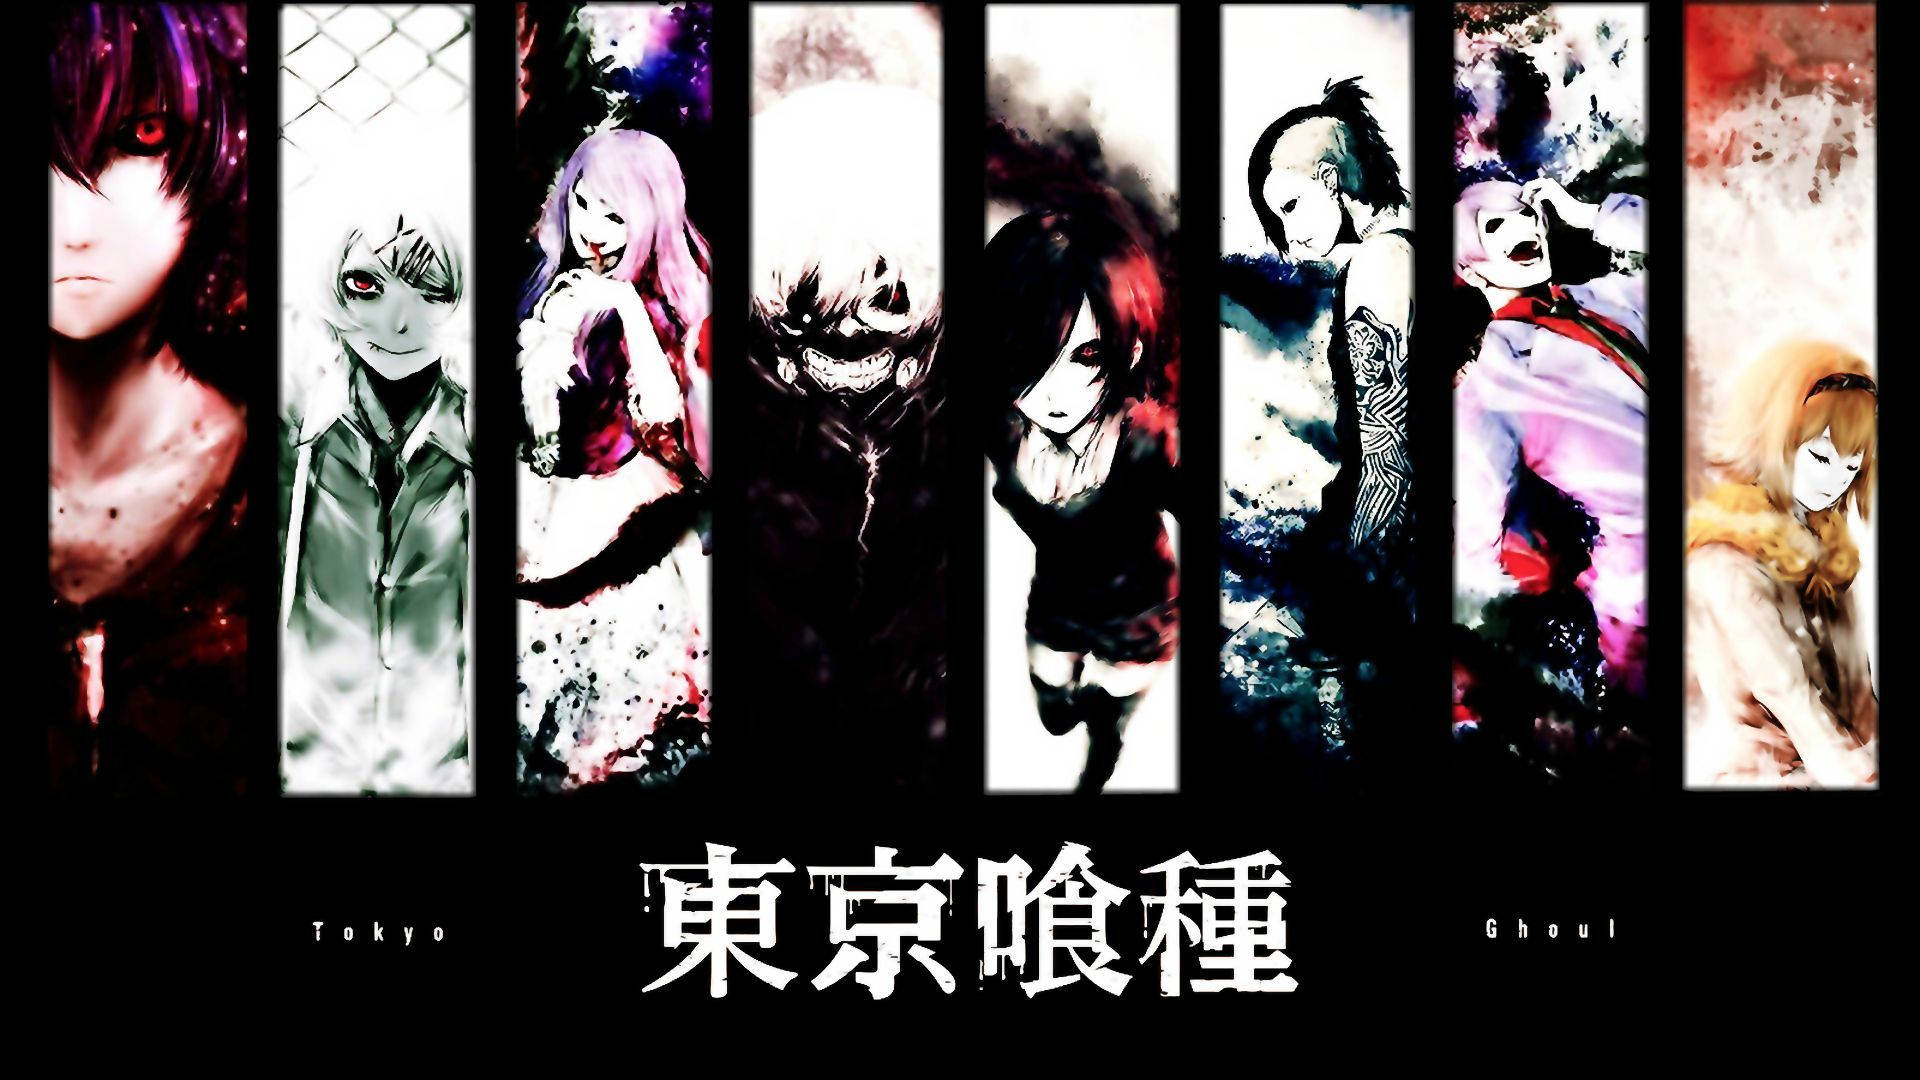 Tokyo Ghoul's Quintessential Characters Wallpaper